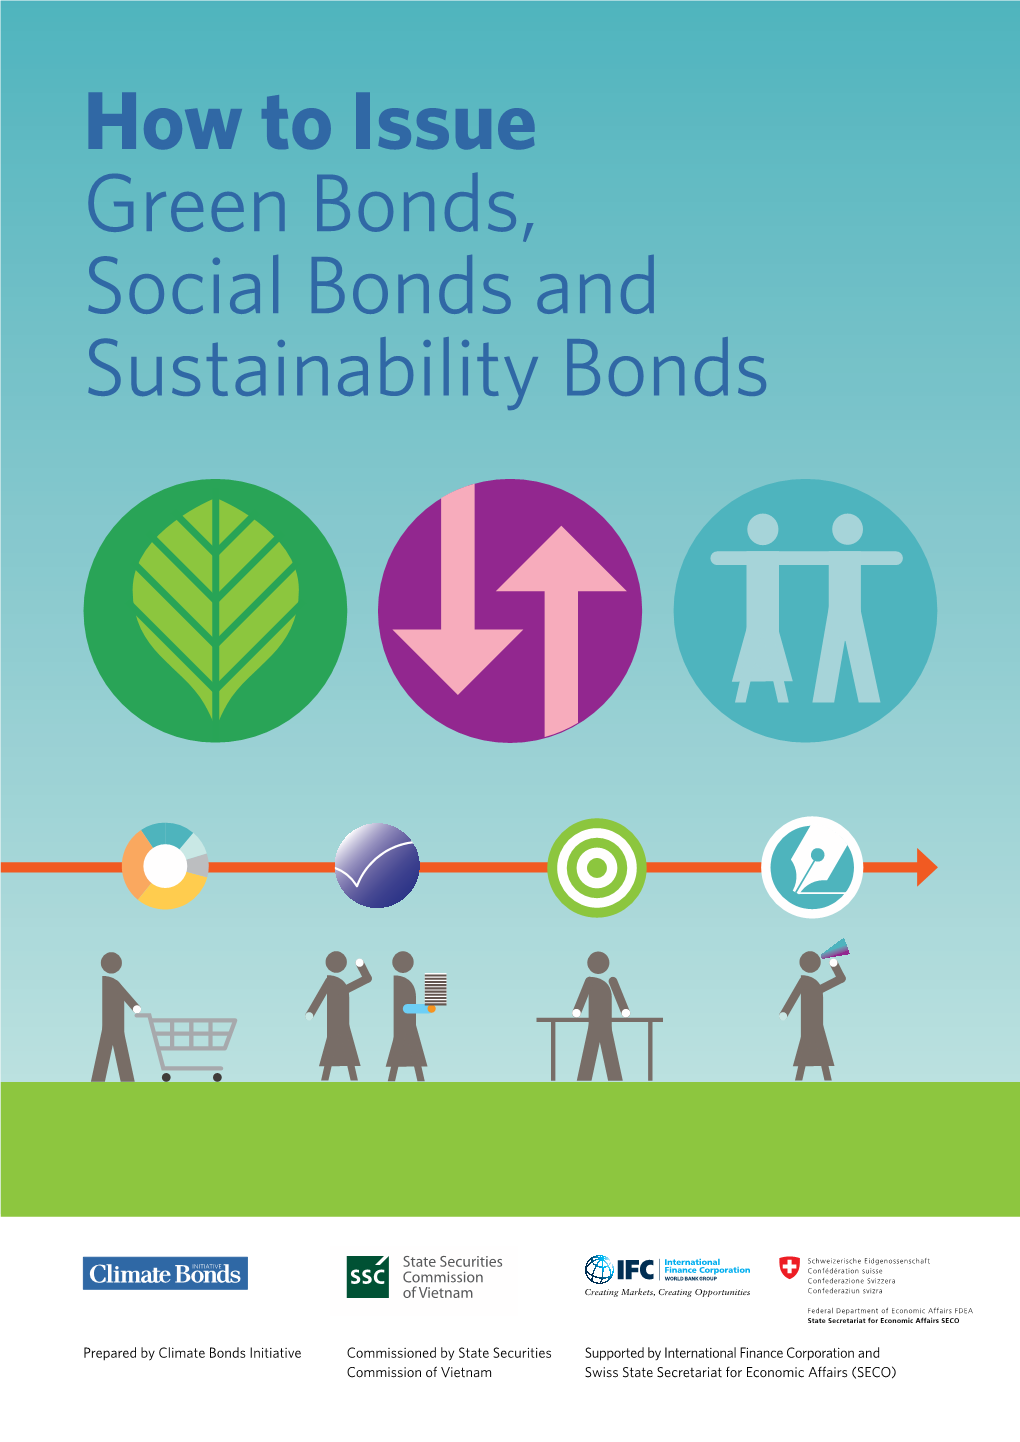 How to Issue Green Bonds, Social Bonds and Sustainability Bonds